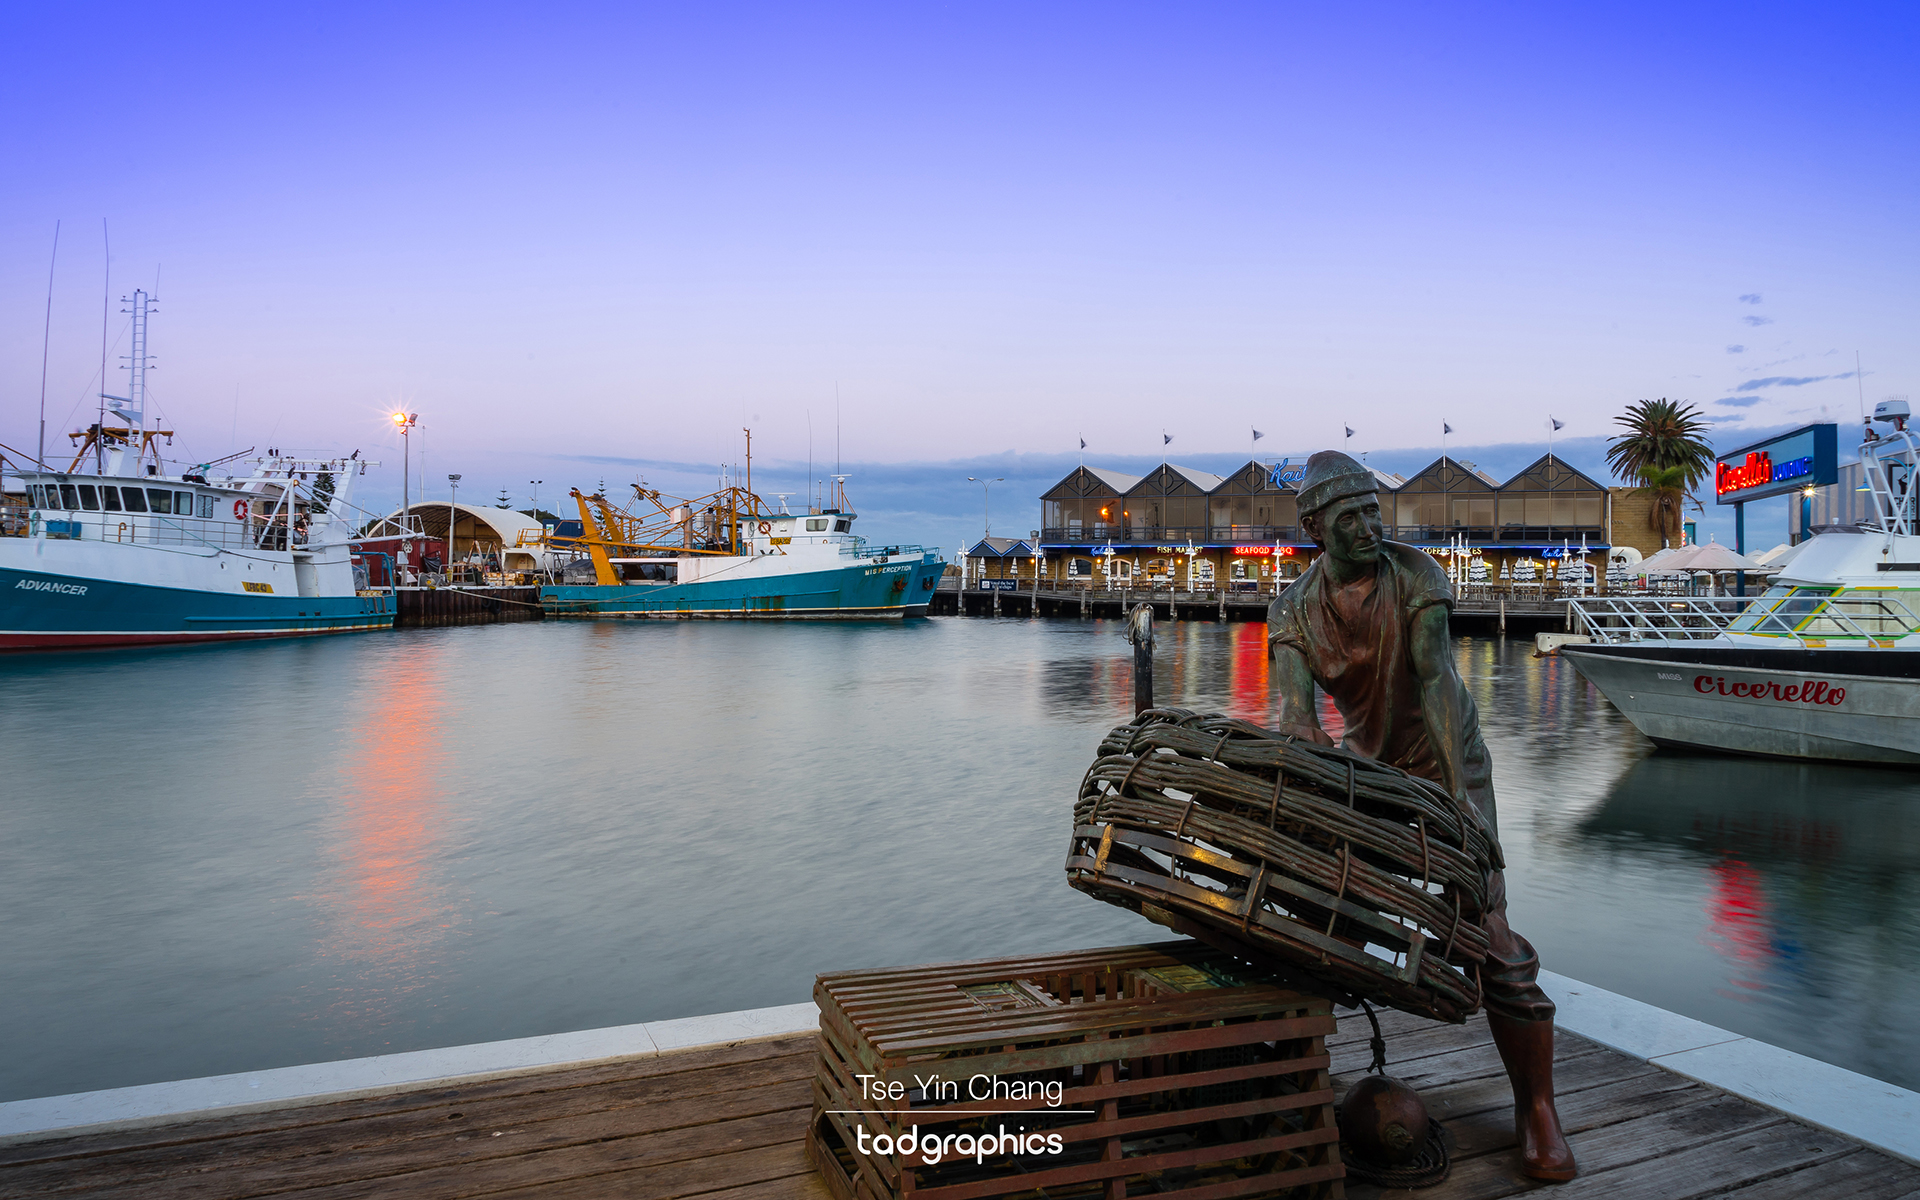 The Fremantle Fisherman’s monument represents the history and lifestyle of harbour side Fremantle, photographed here in winter